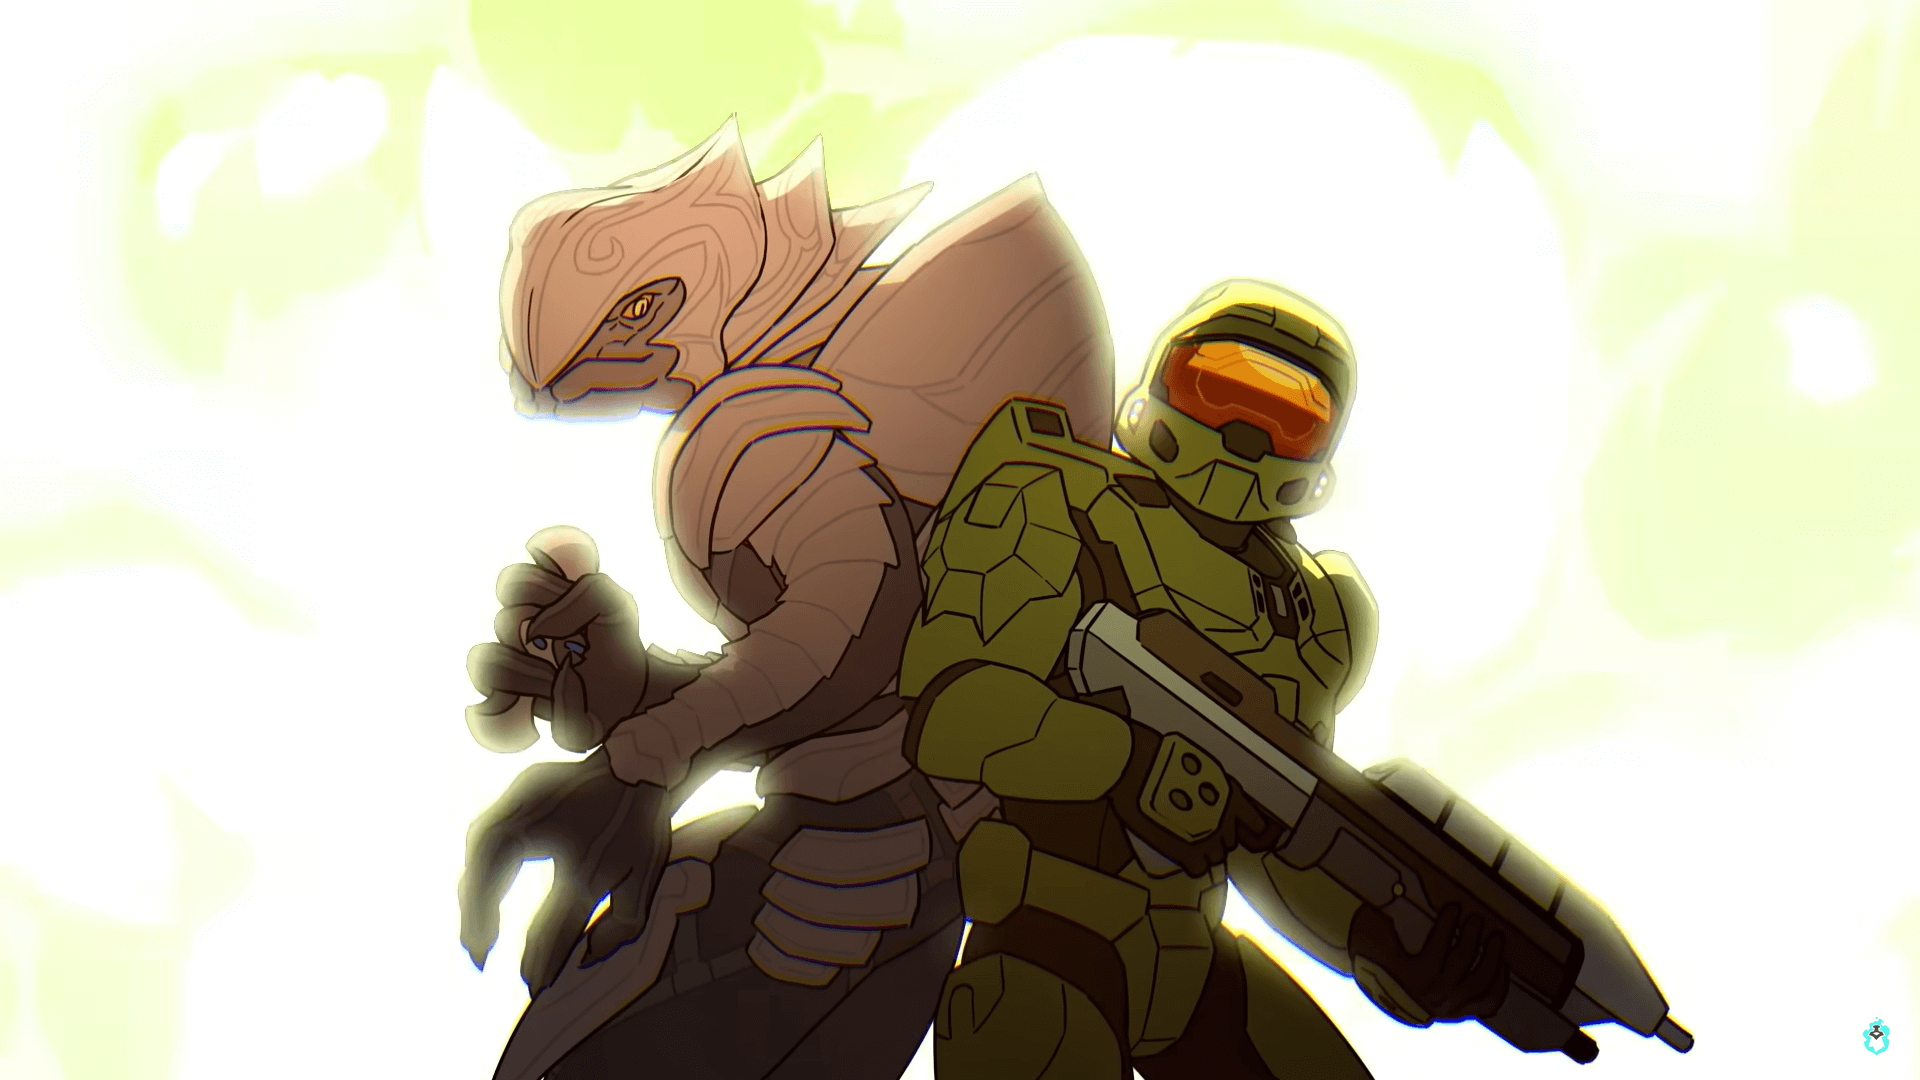 New Crossover Skins in Brawlhalla: Master Chief and Arbiter